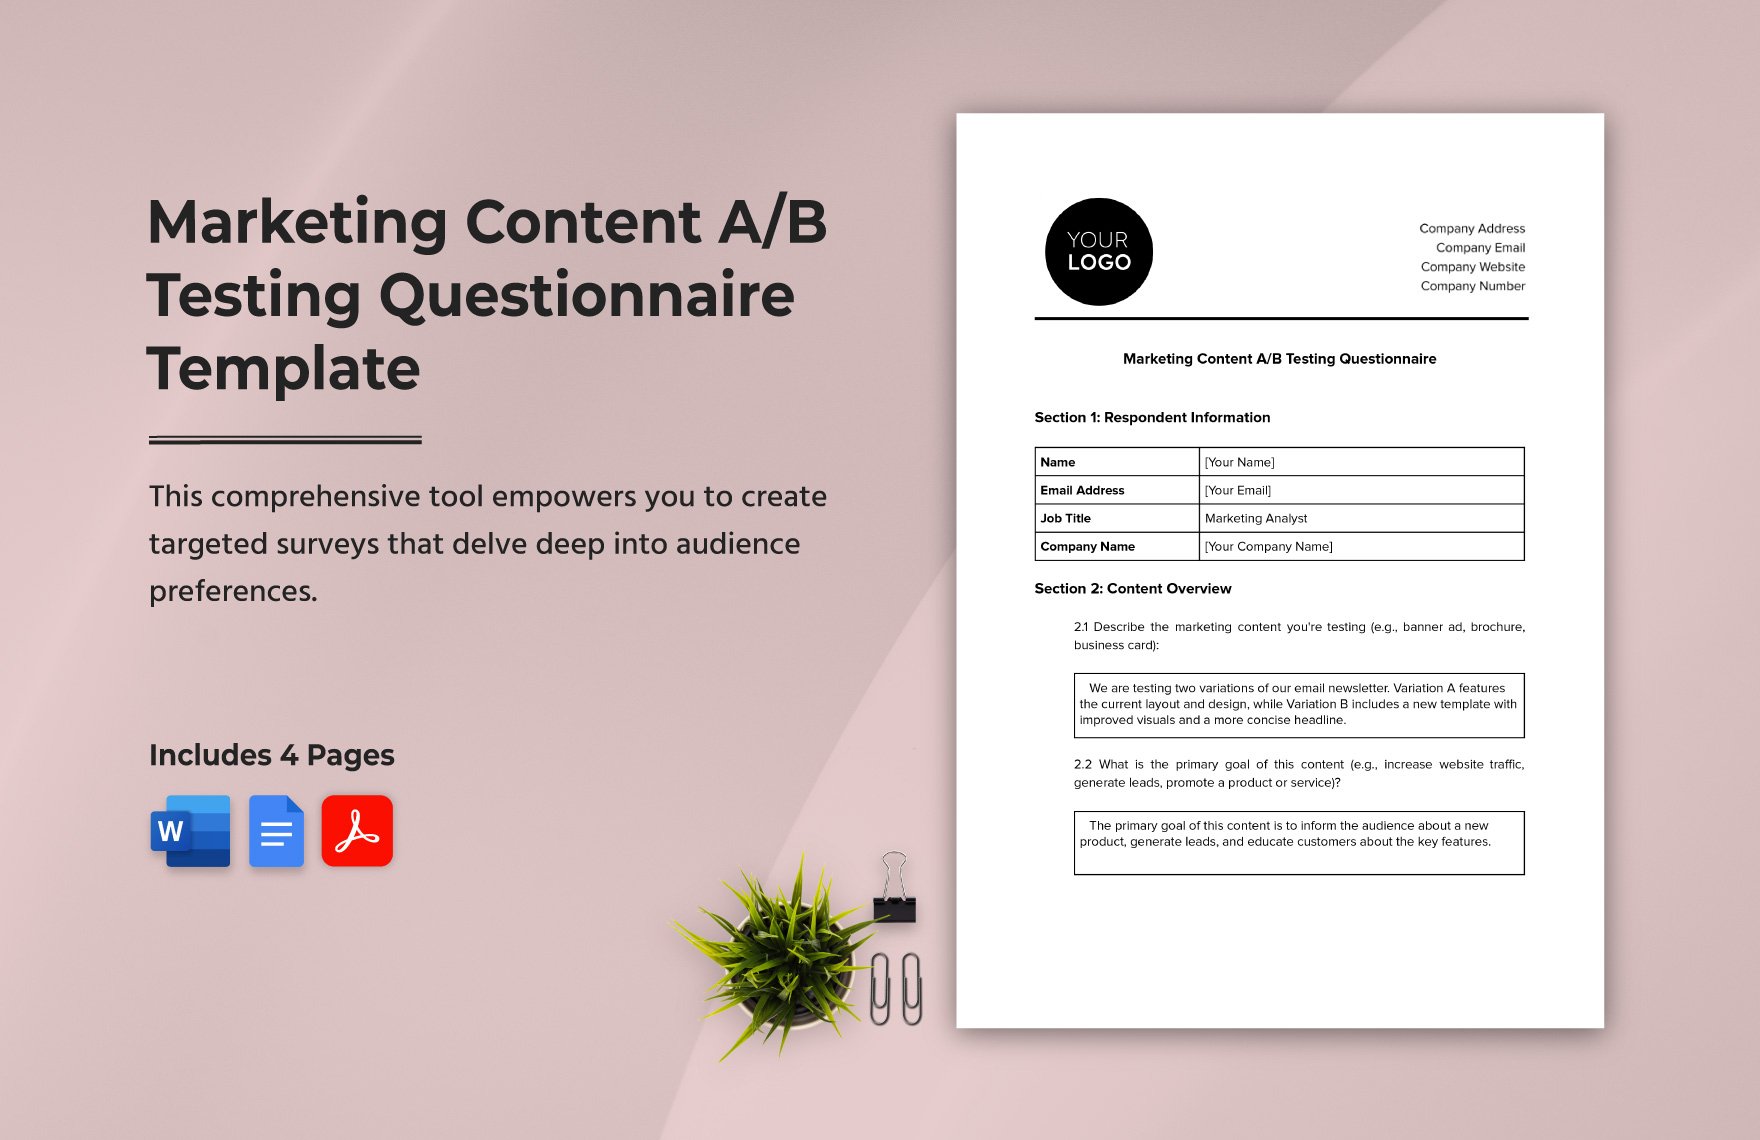 Marketing Content A/B Testing Questionnaire Template in Word, Google Docs, PDF